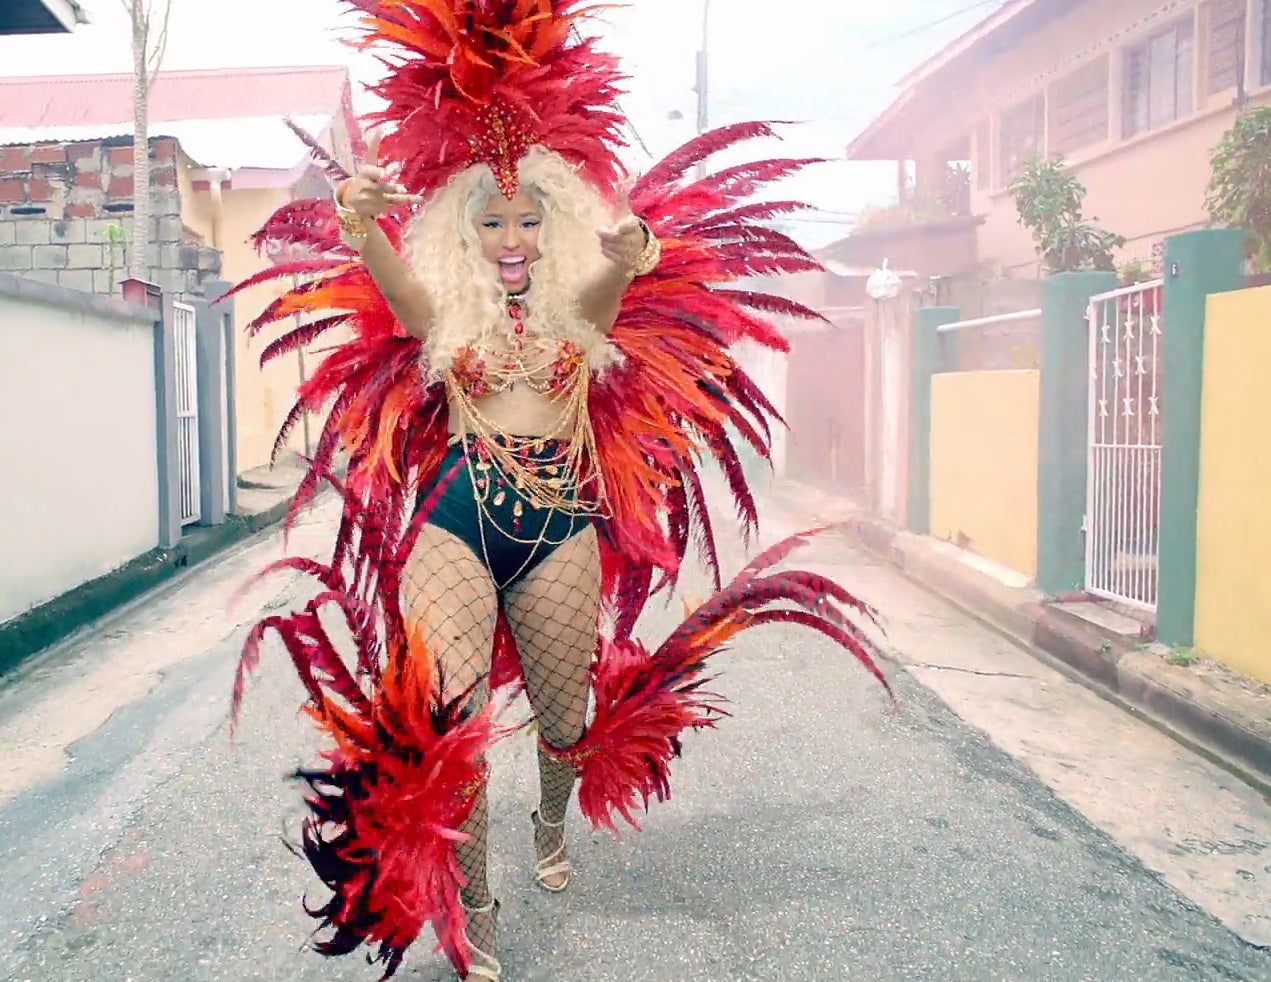 9 Celebrities Who Gave Us Life at Carnival
